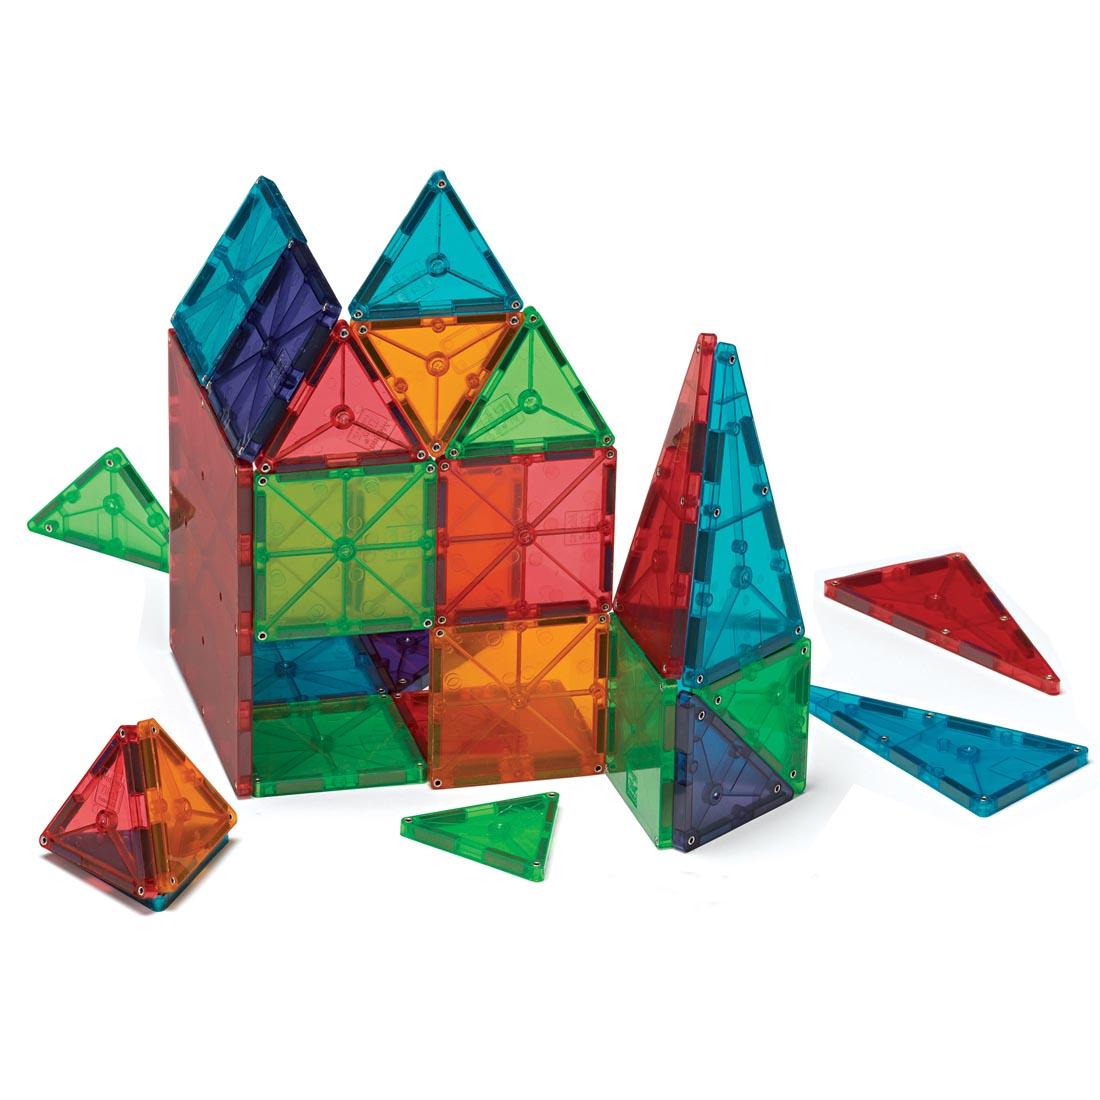 A structure made with the Magna-Tiles Clear Colors 100-Count Set